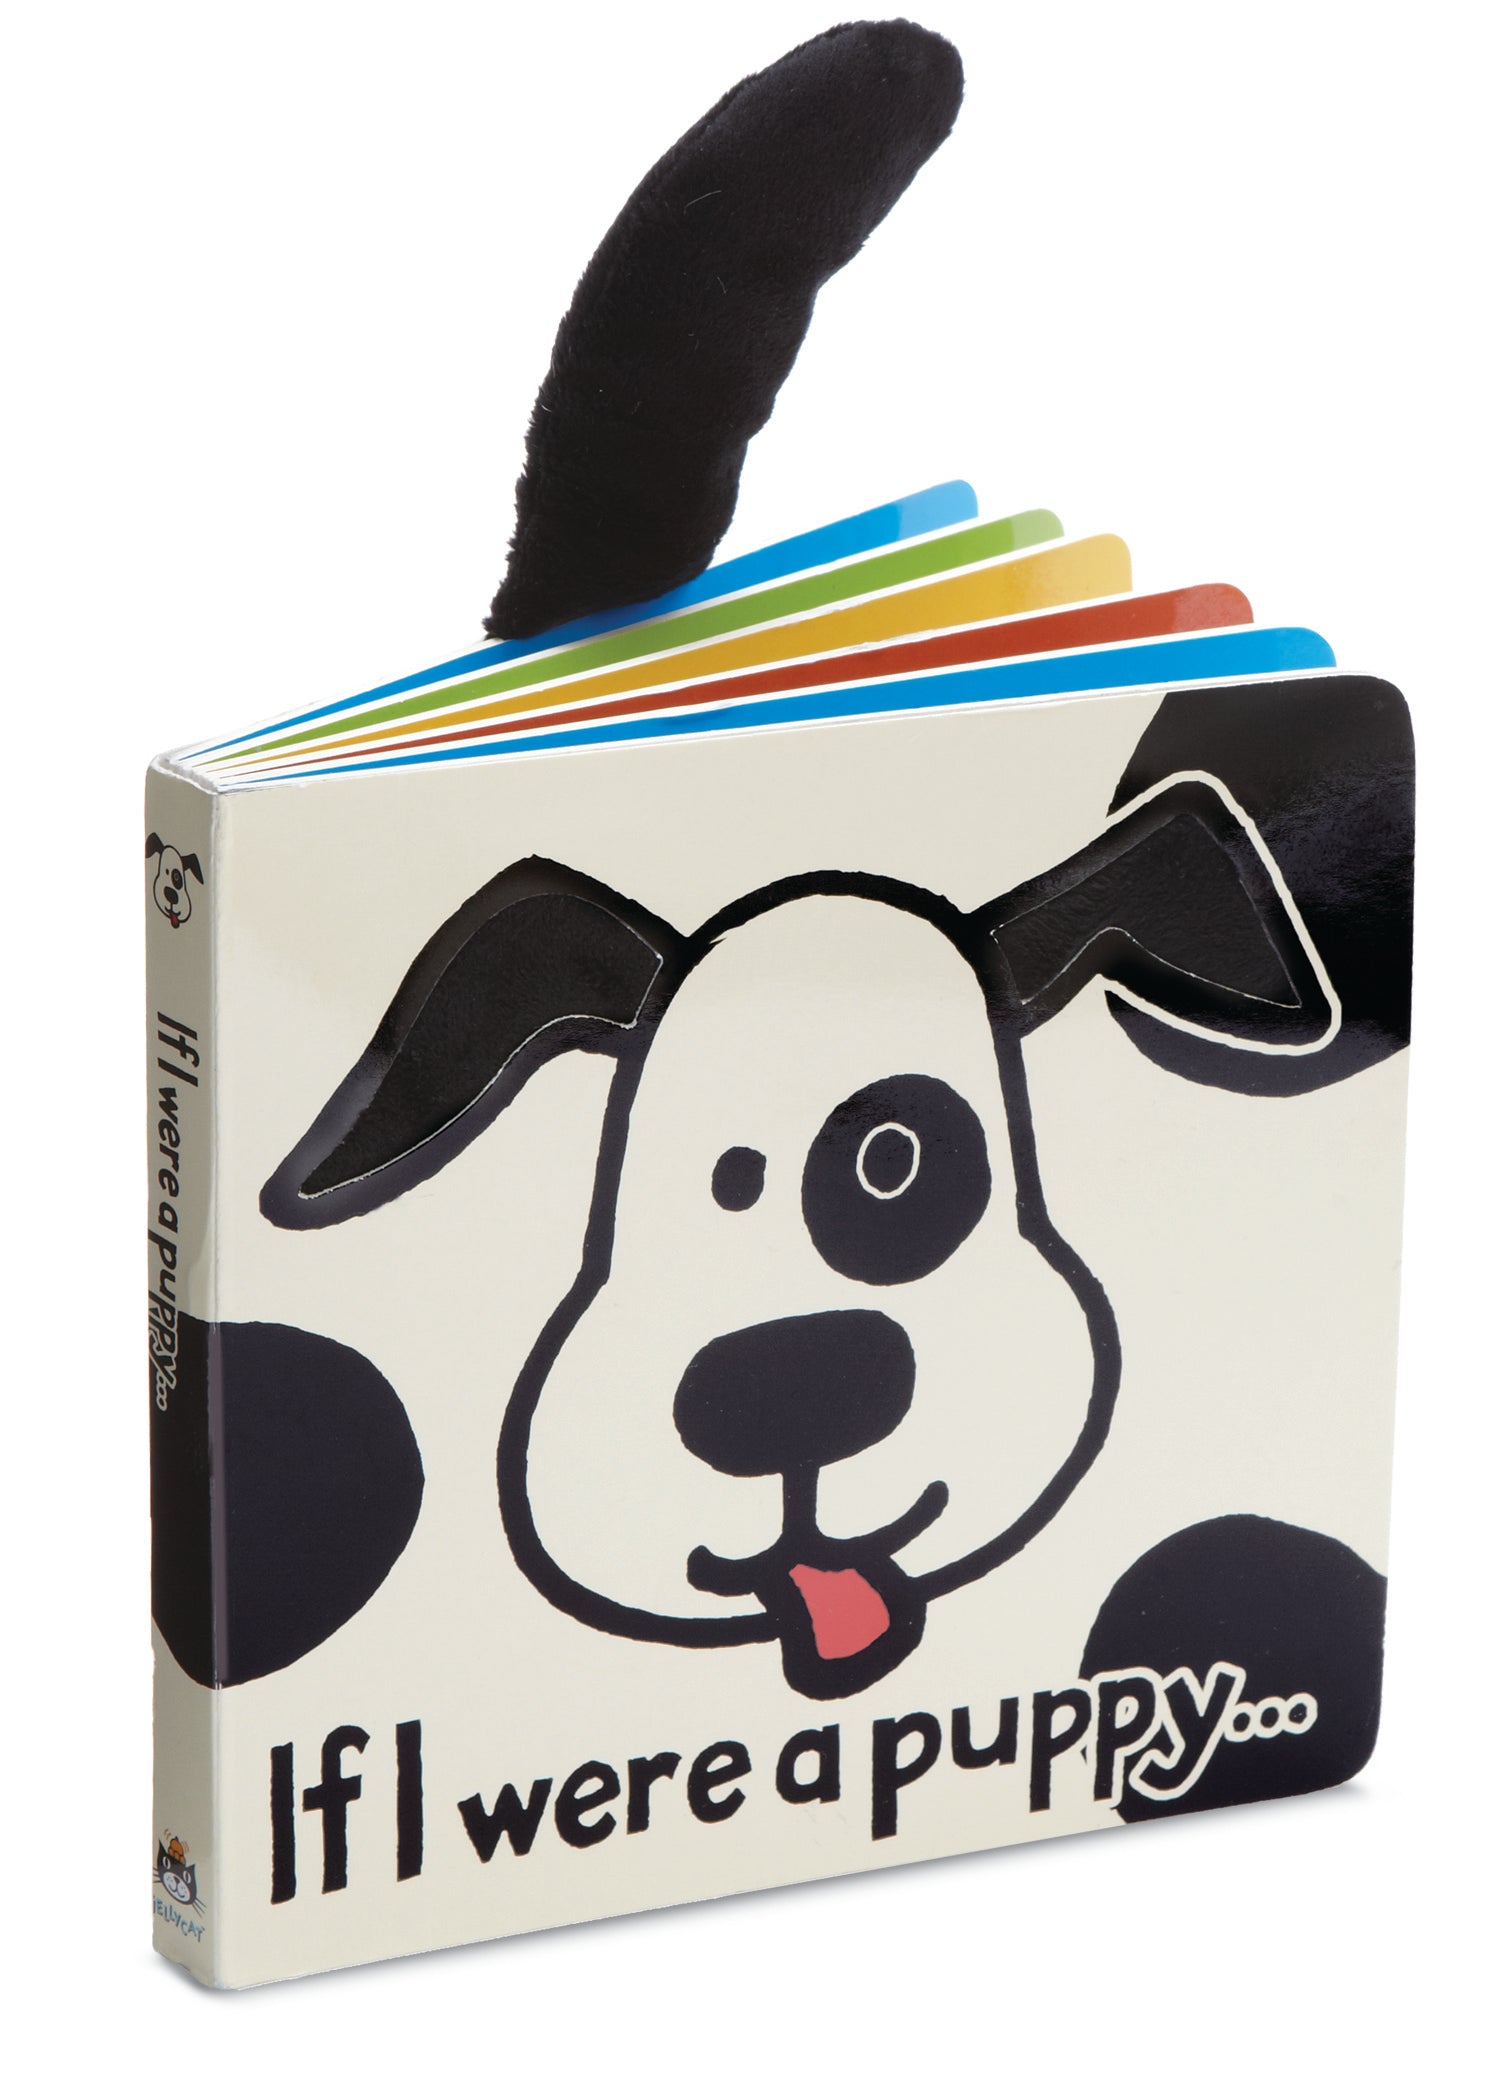 IF I WERE A PUPPY BOOK by JELLYCAT